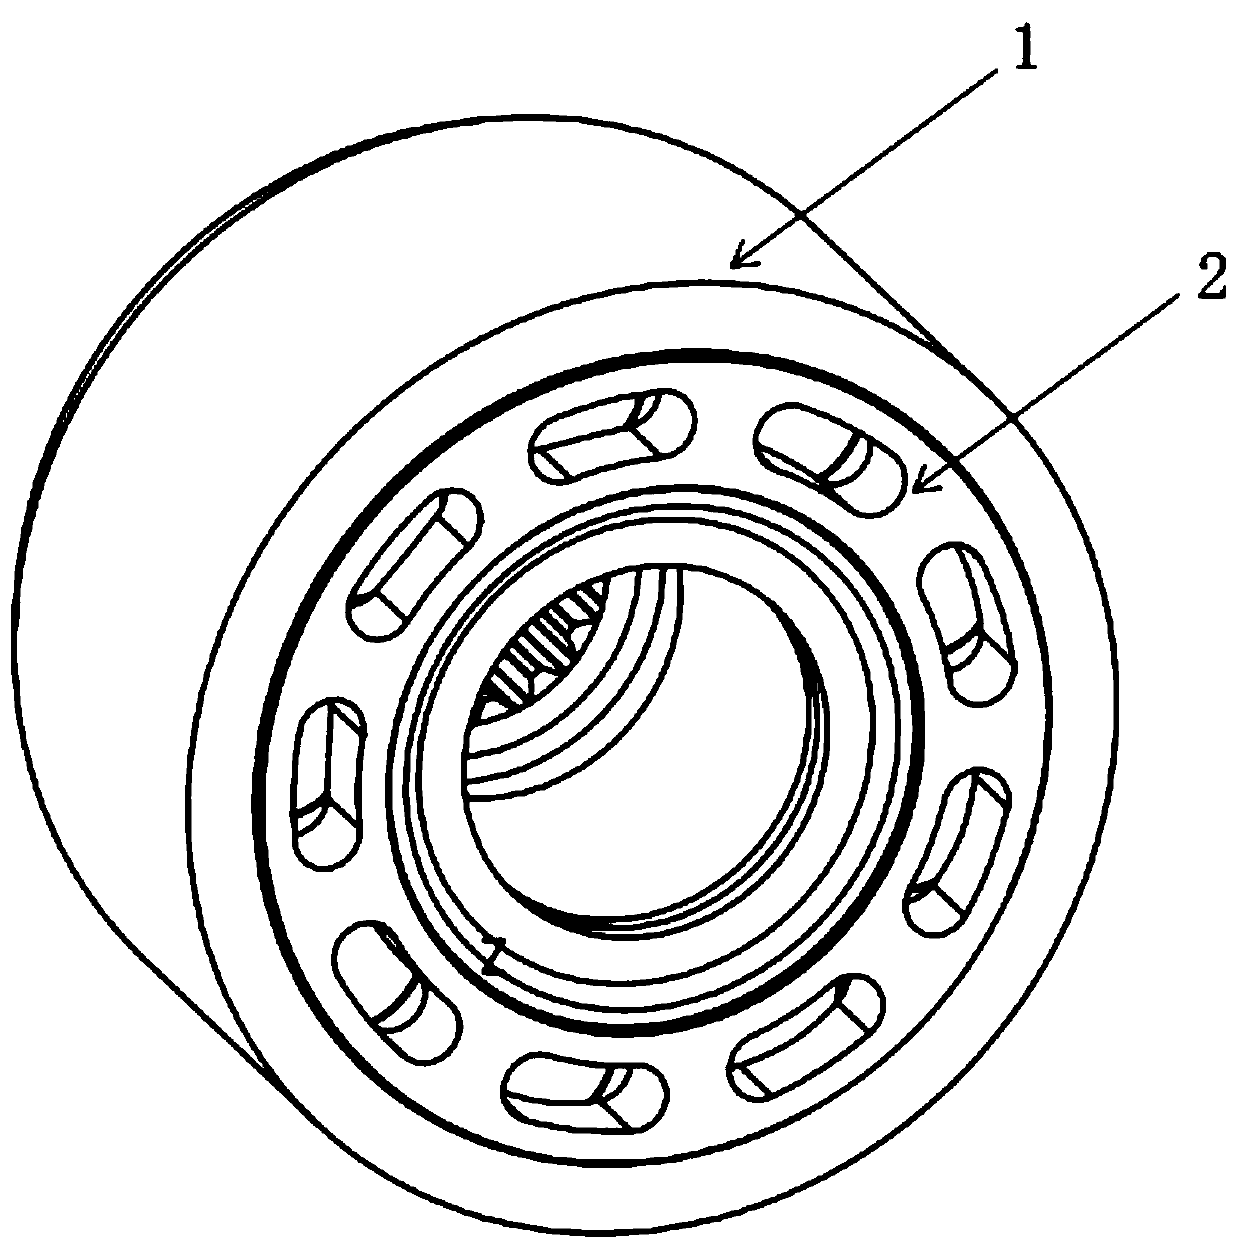 Bimetal cylinder block, friction pair and machining method for axial variable piston pump